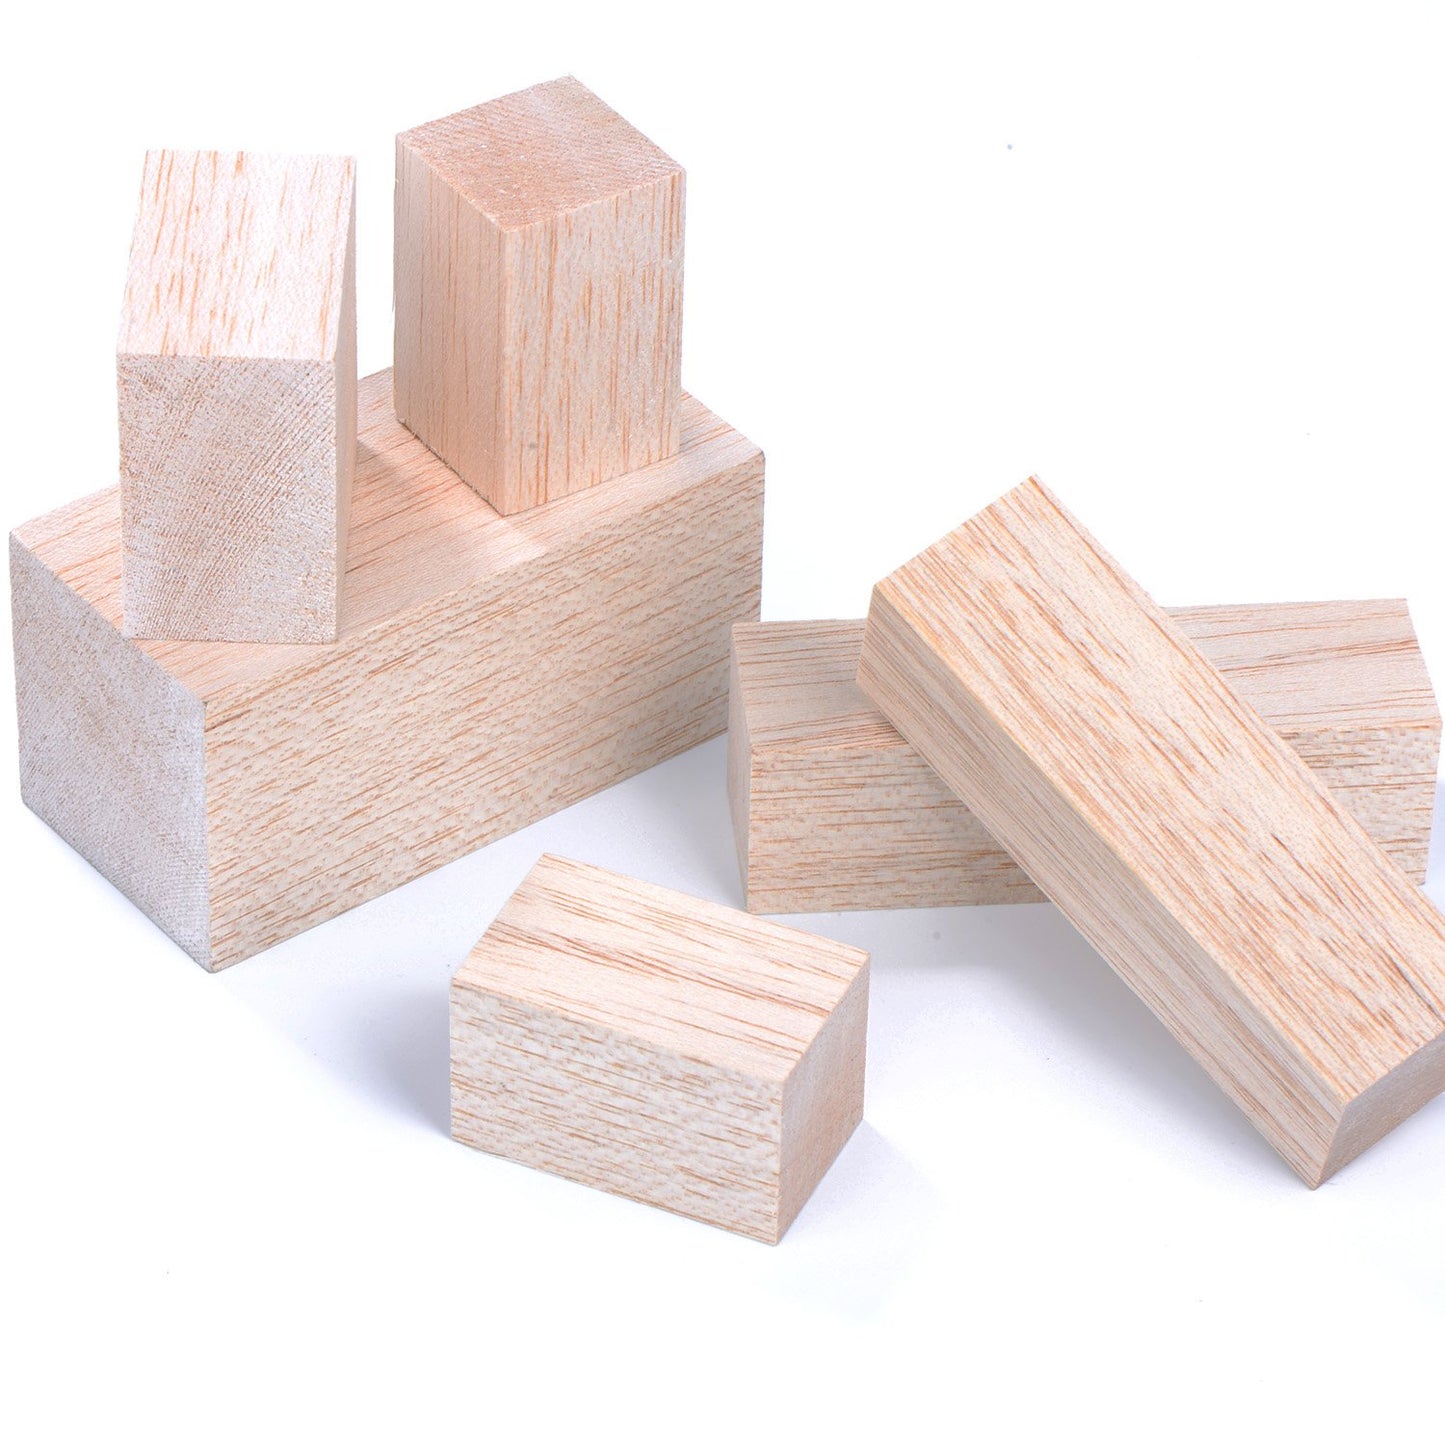 Sumind 12 Pieces Unfinished Balsa Wood Mini Carving Blocks, 4 Sizes, 50 x 50 x 100 mm, 30 x 30 x 100 mm, 30 x 30 x 50 mm, 50 x 30 x 50 mm